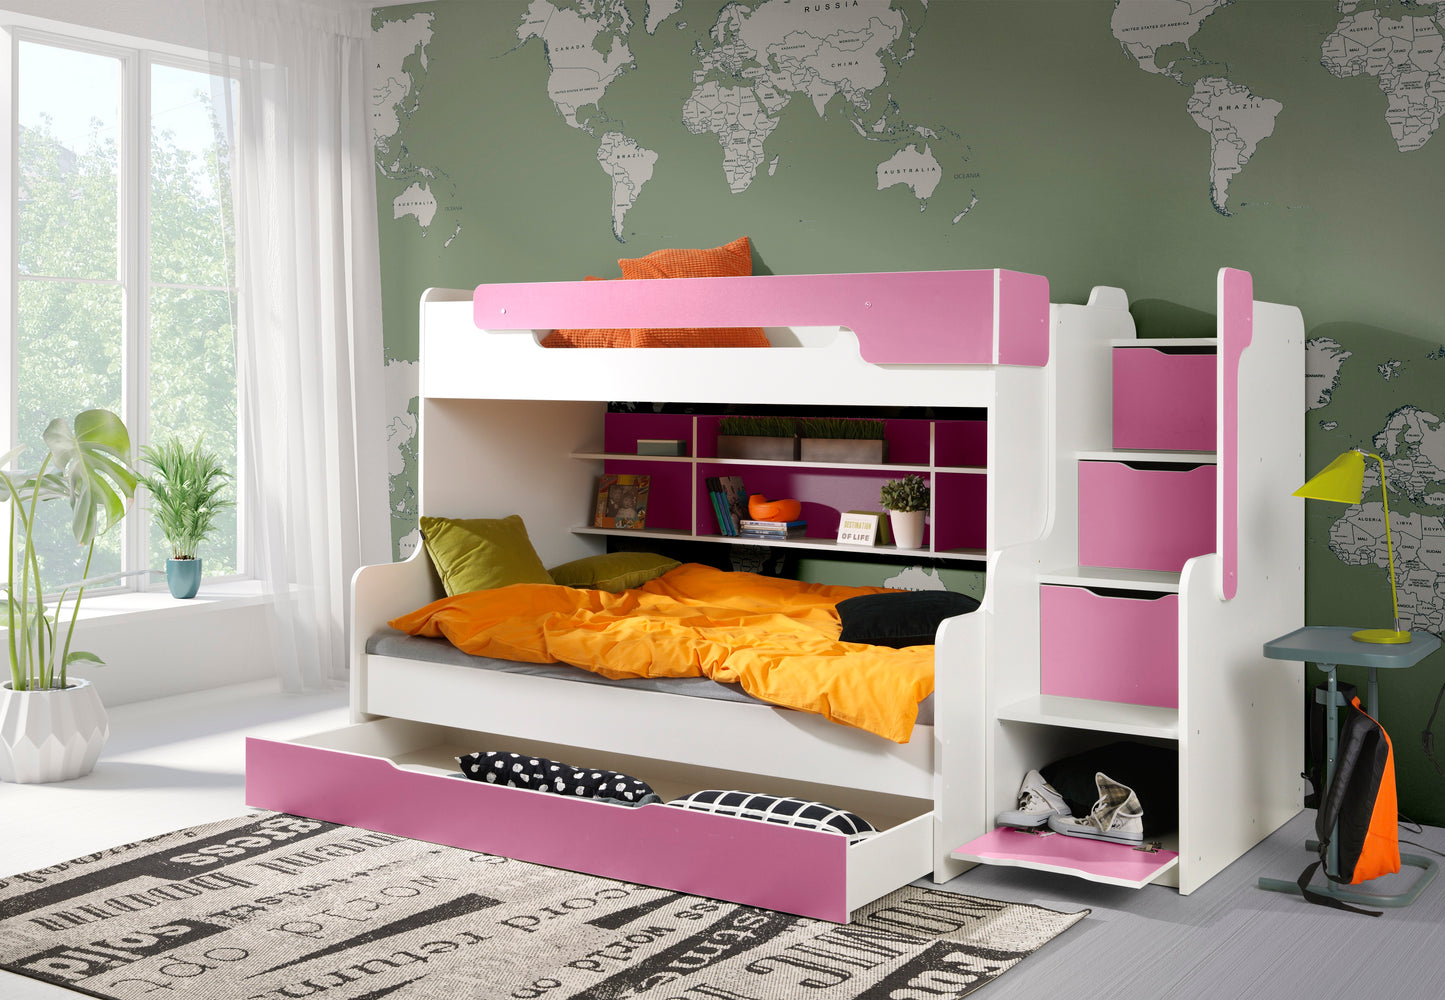 HENRY - Modern Design and Functional Triple Bunk Bed, Stairs, Storage - 6 Colours